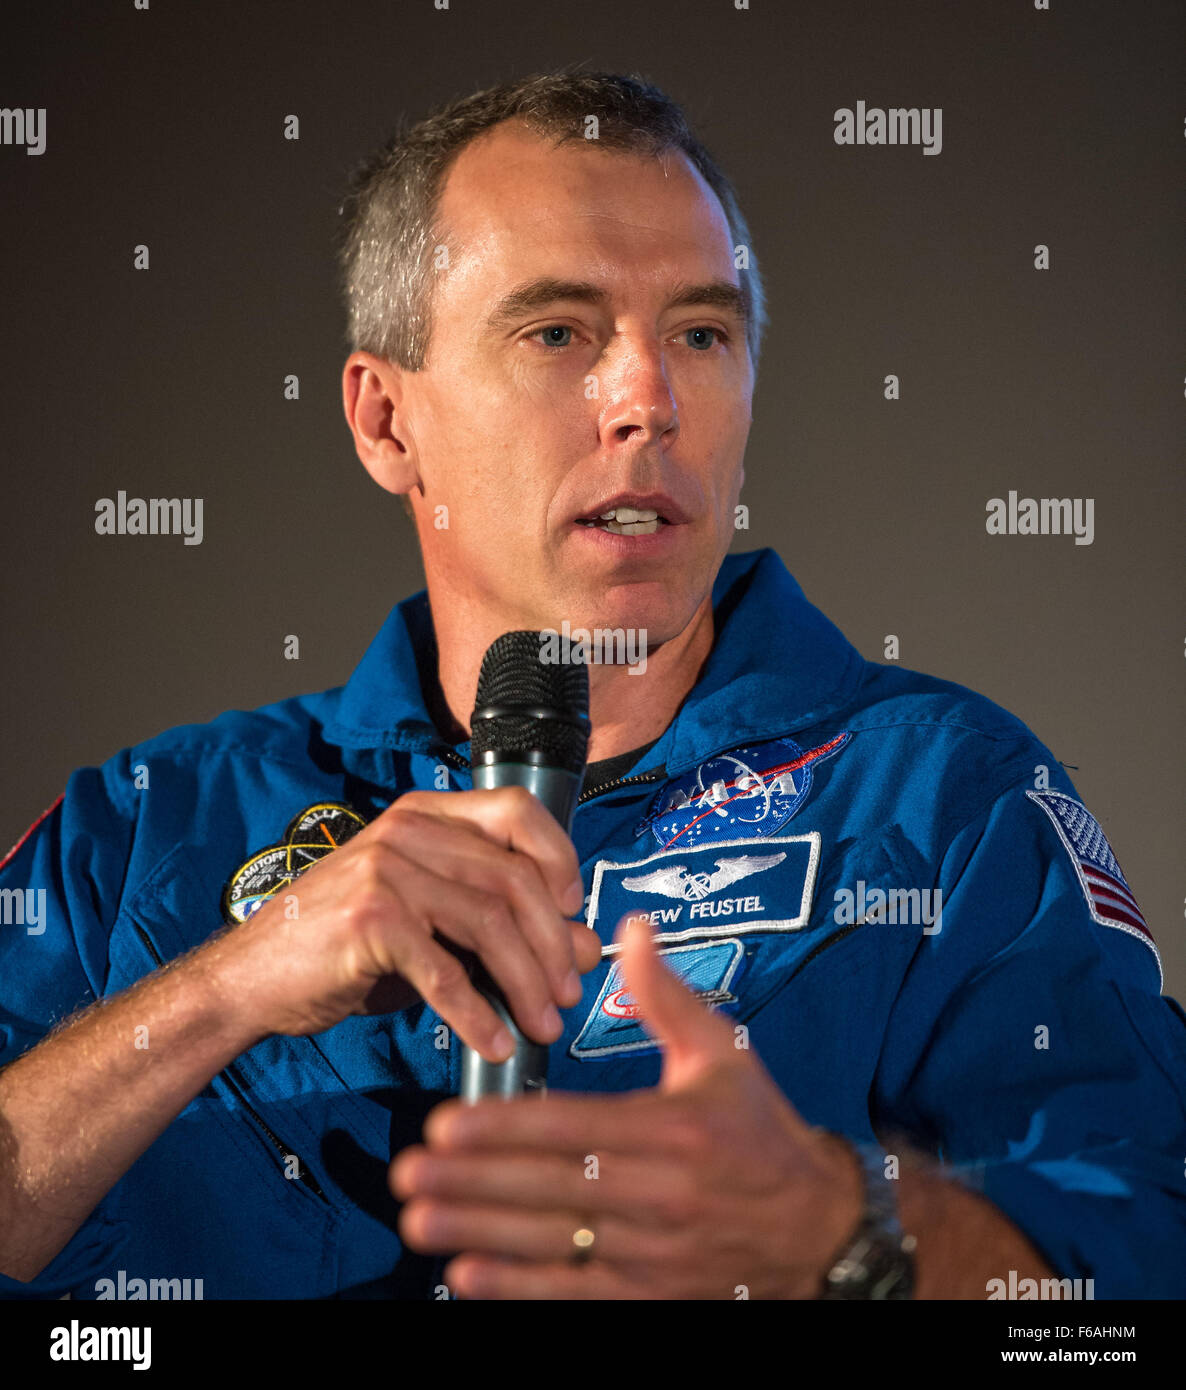 NASA Astronaut Drew Feustel participates in a question and answer session about NASA’s journey to Mars and the film ”The Martian,” Tuesday, Aug. 18, 2015, at the United Artist Theater in La Cañada Flintridge, California. NASA scientists and engineers served as technical consultants on the film. The movie portrays a realistic view of the climate and topography of Mars, based on NASA data, and some of the challenges NASA faces as we prepare for human exploration of the Red Planet in the 2030s. Photo Credit: (NASA/Bill Ingalls) Stock Photo